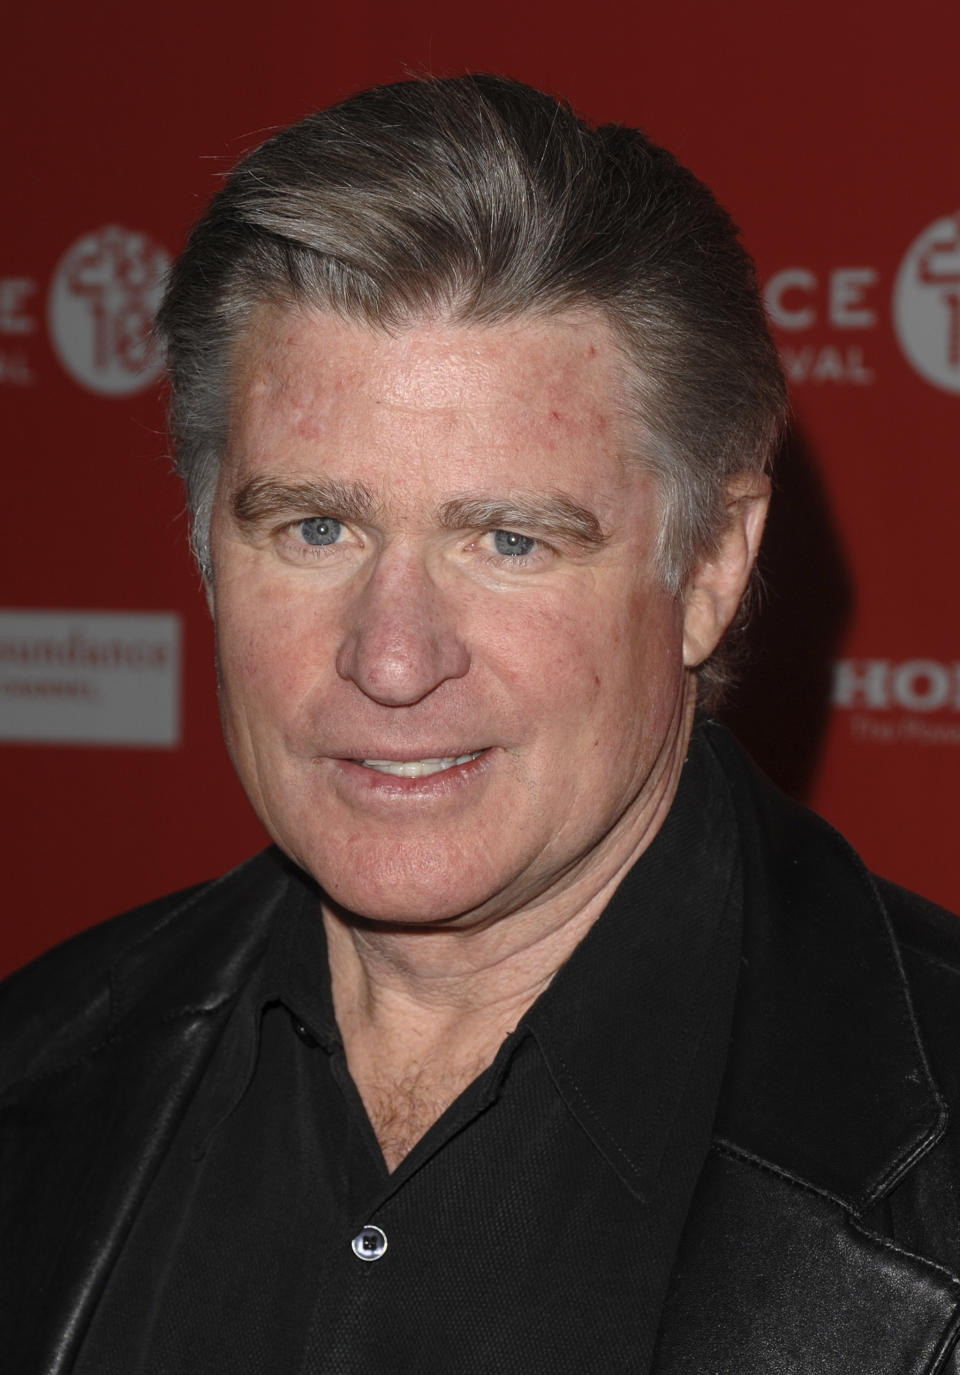 FILE - Actor Treat Williams attends the opening night premiere of "Howl" at the 2010 Sundance Film Festival in Park City, Utah on Jan. 21, 2010. Williams, whose nearly 50-year career included starring roles in the TV series “Everwood” and the movie “Hair,” died Monday, June 12, 2023, after a motorcycle crash in Vermont, state police said. He was 71. (AP Photo/Peter Kramer, File)